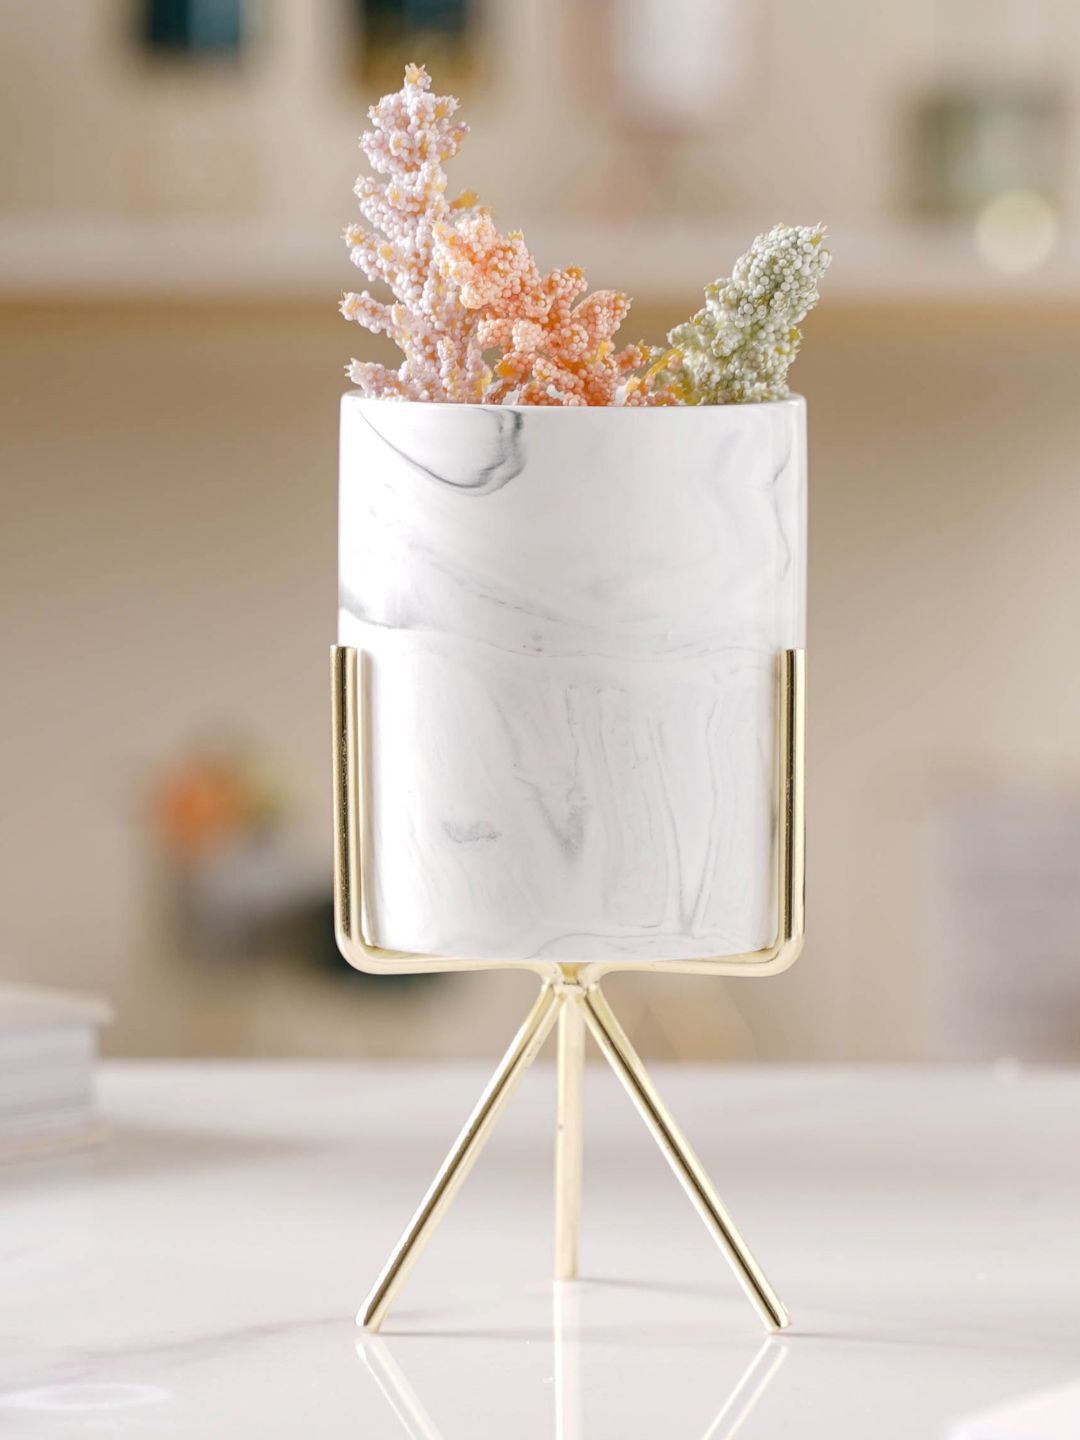 Nestasia Grey & Gold-Toned Marble Printed Ceramic Planter With Metal Stand Price in India